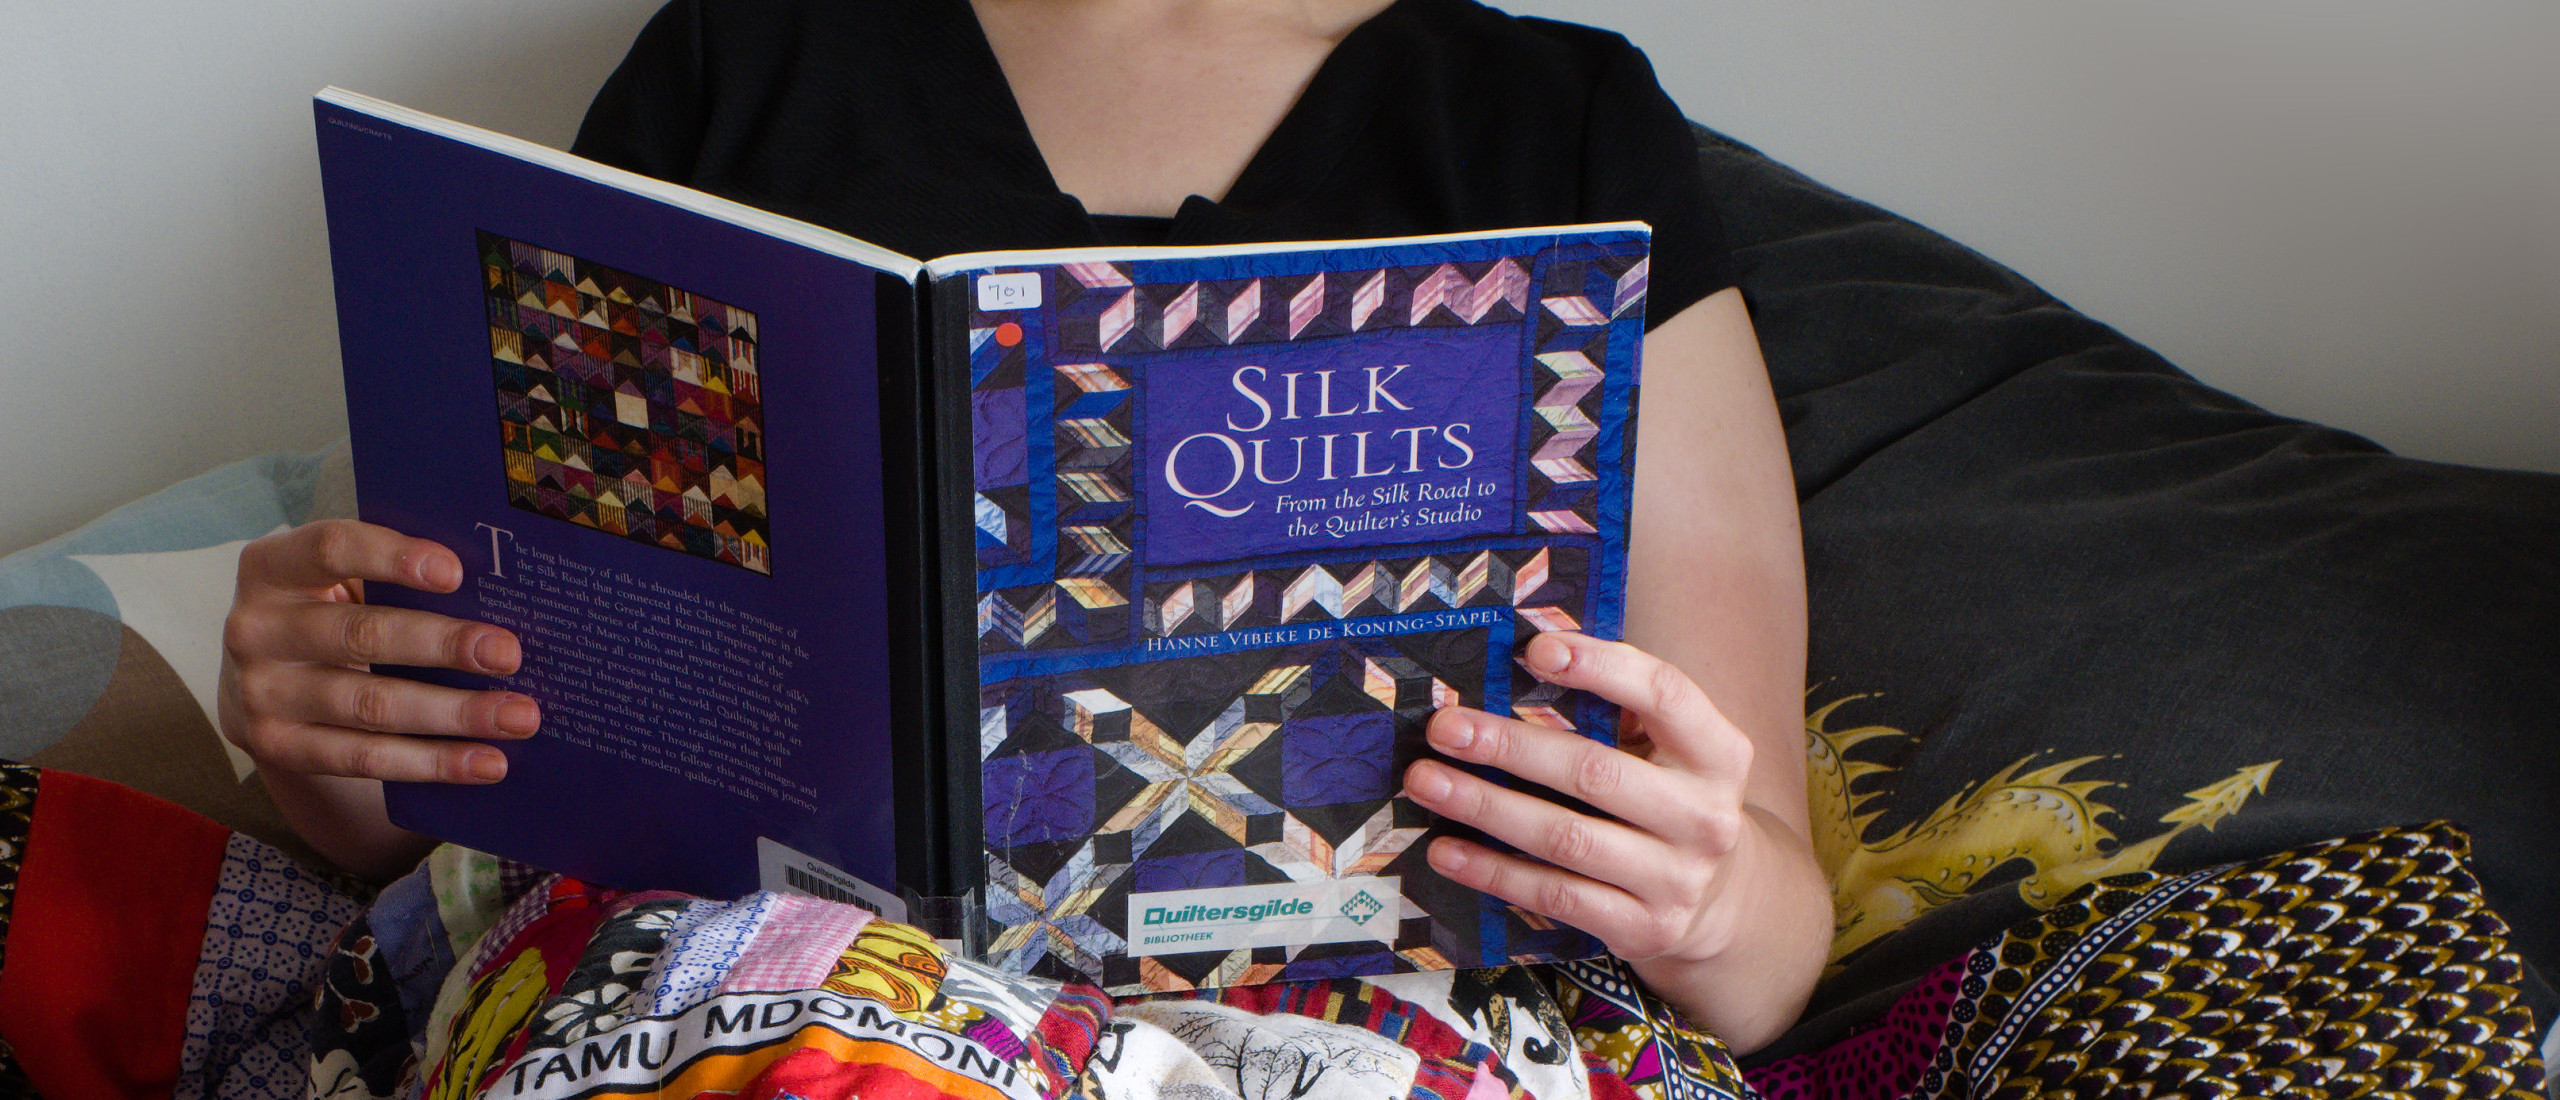 Rianne of Kick-Ass Quilts reading a book about silk quilts under a blanket